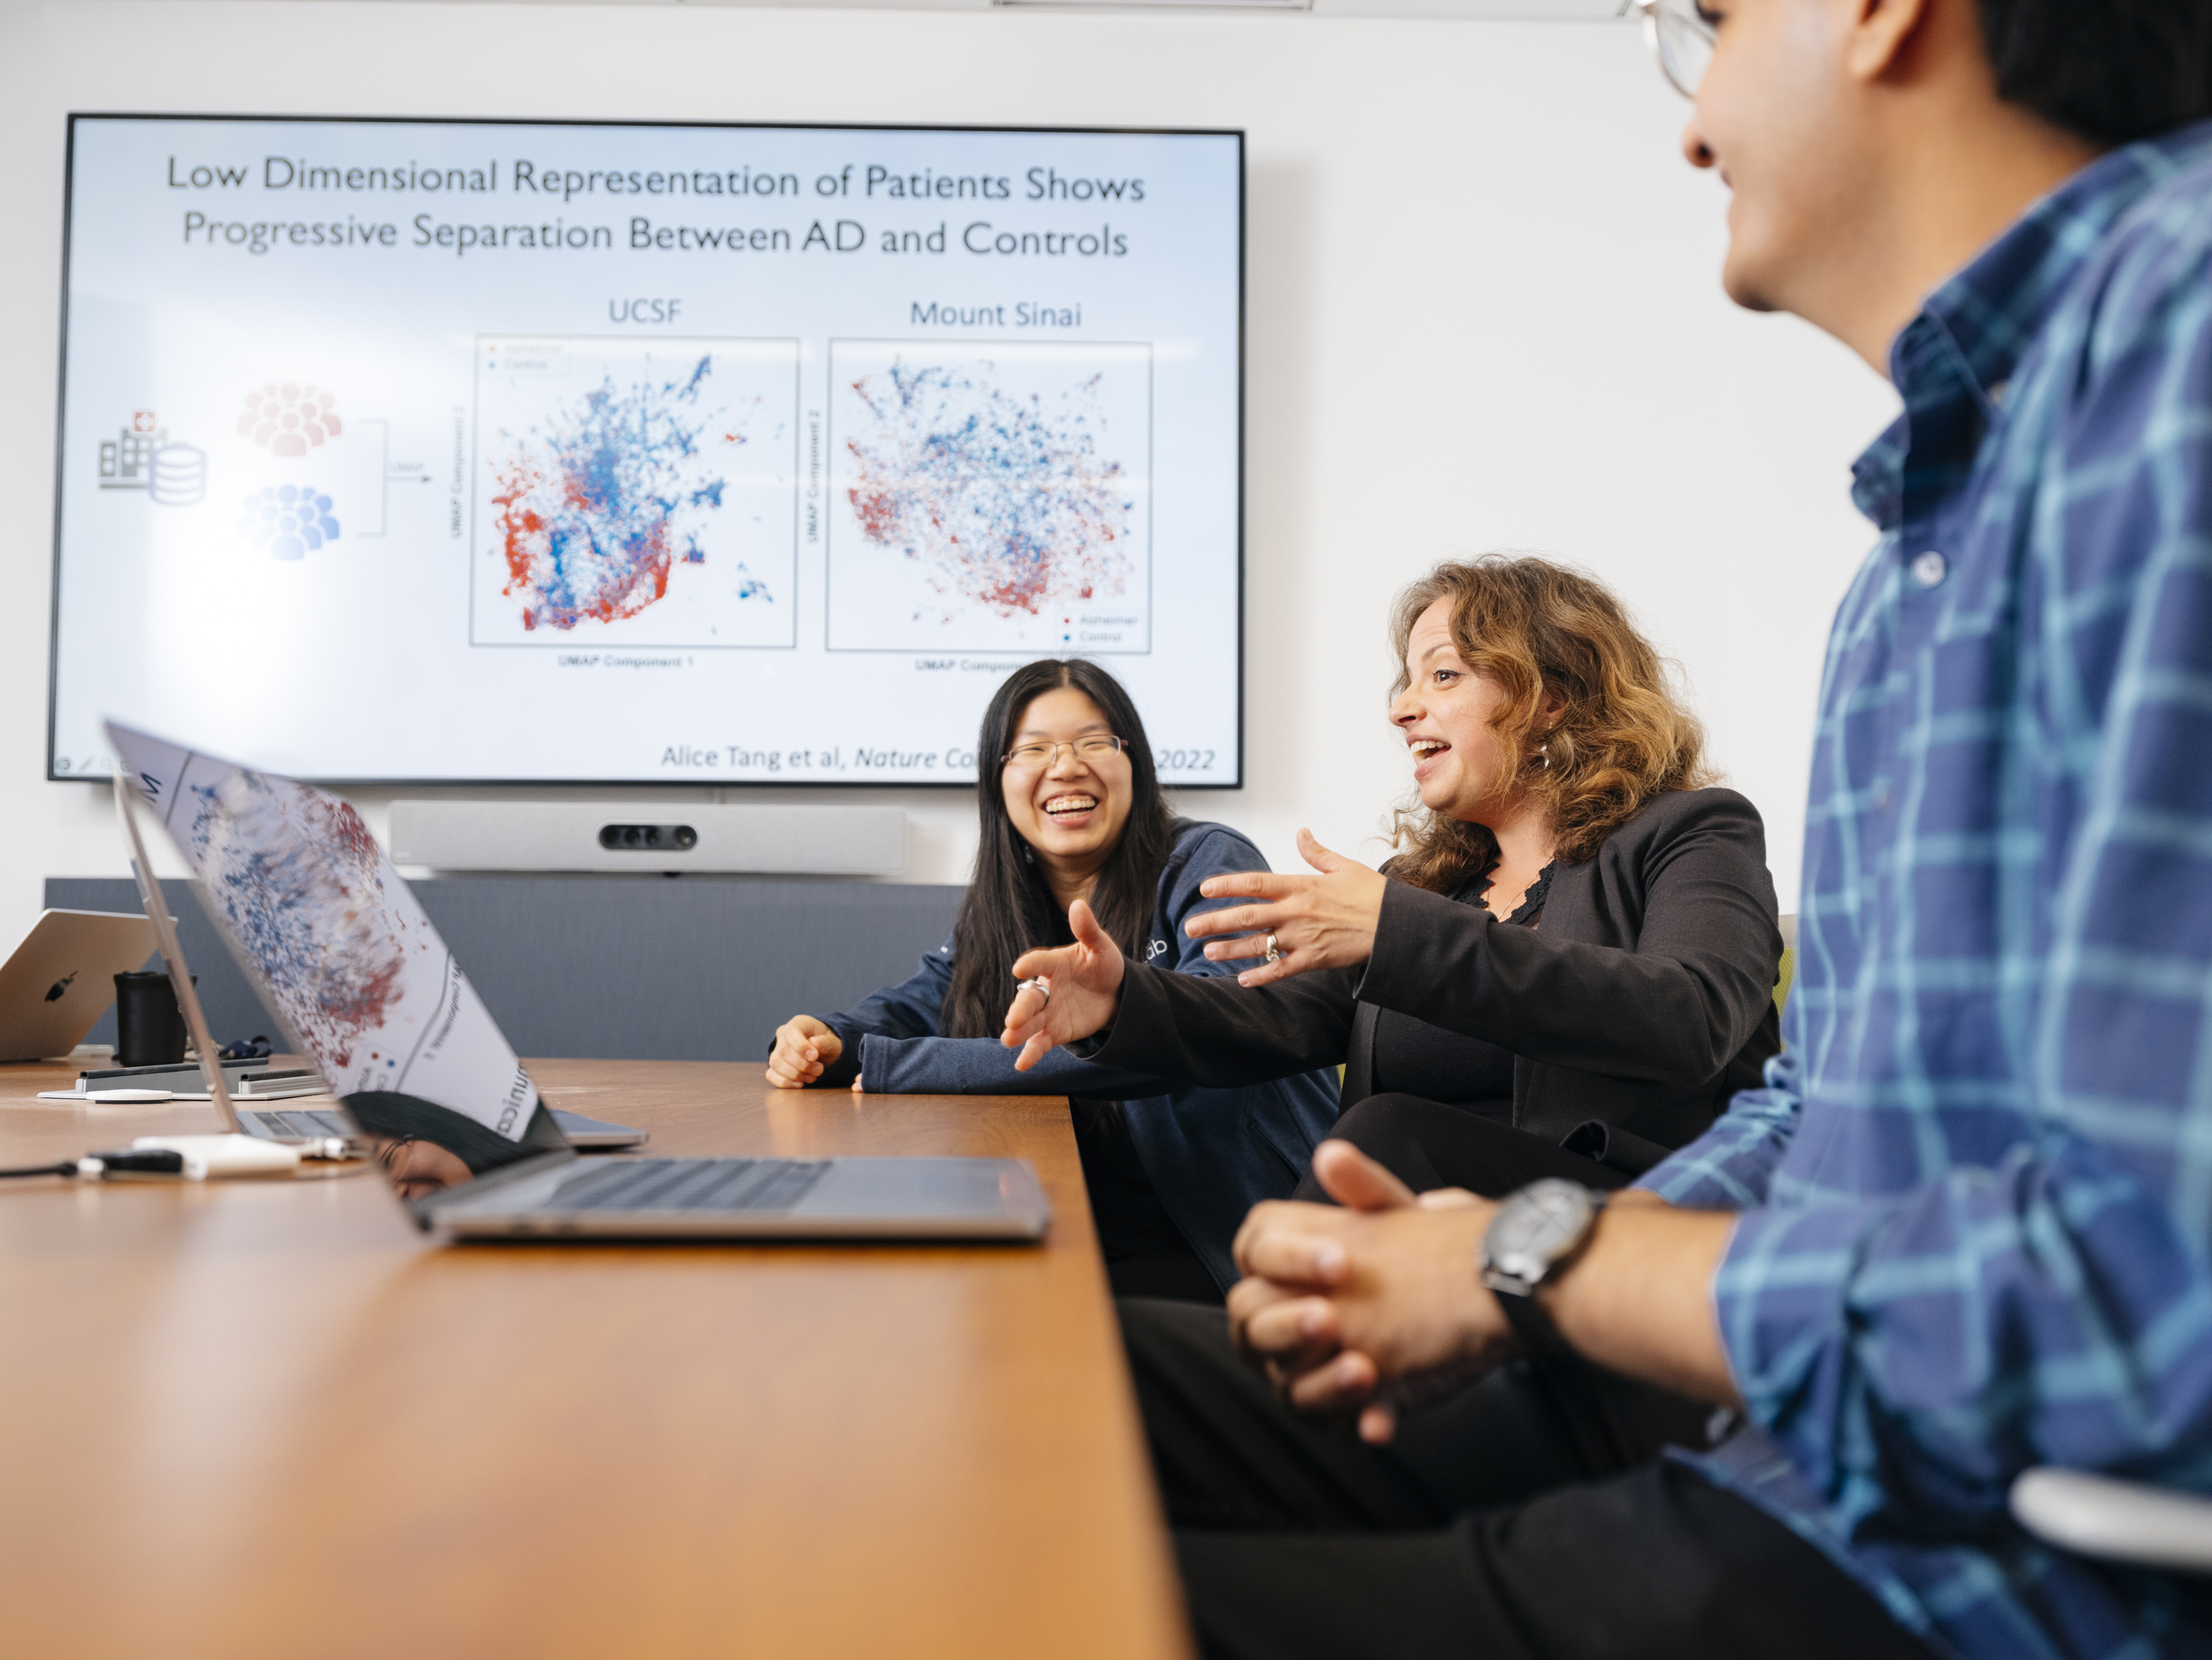 Alice Tang, Marina Sirota and another member of their lab discuss a research presentation in a conference room.